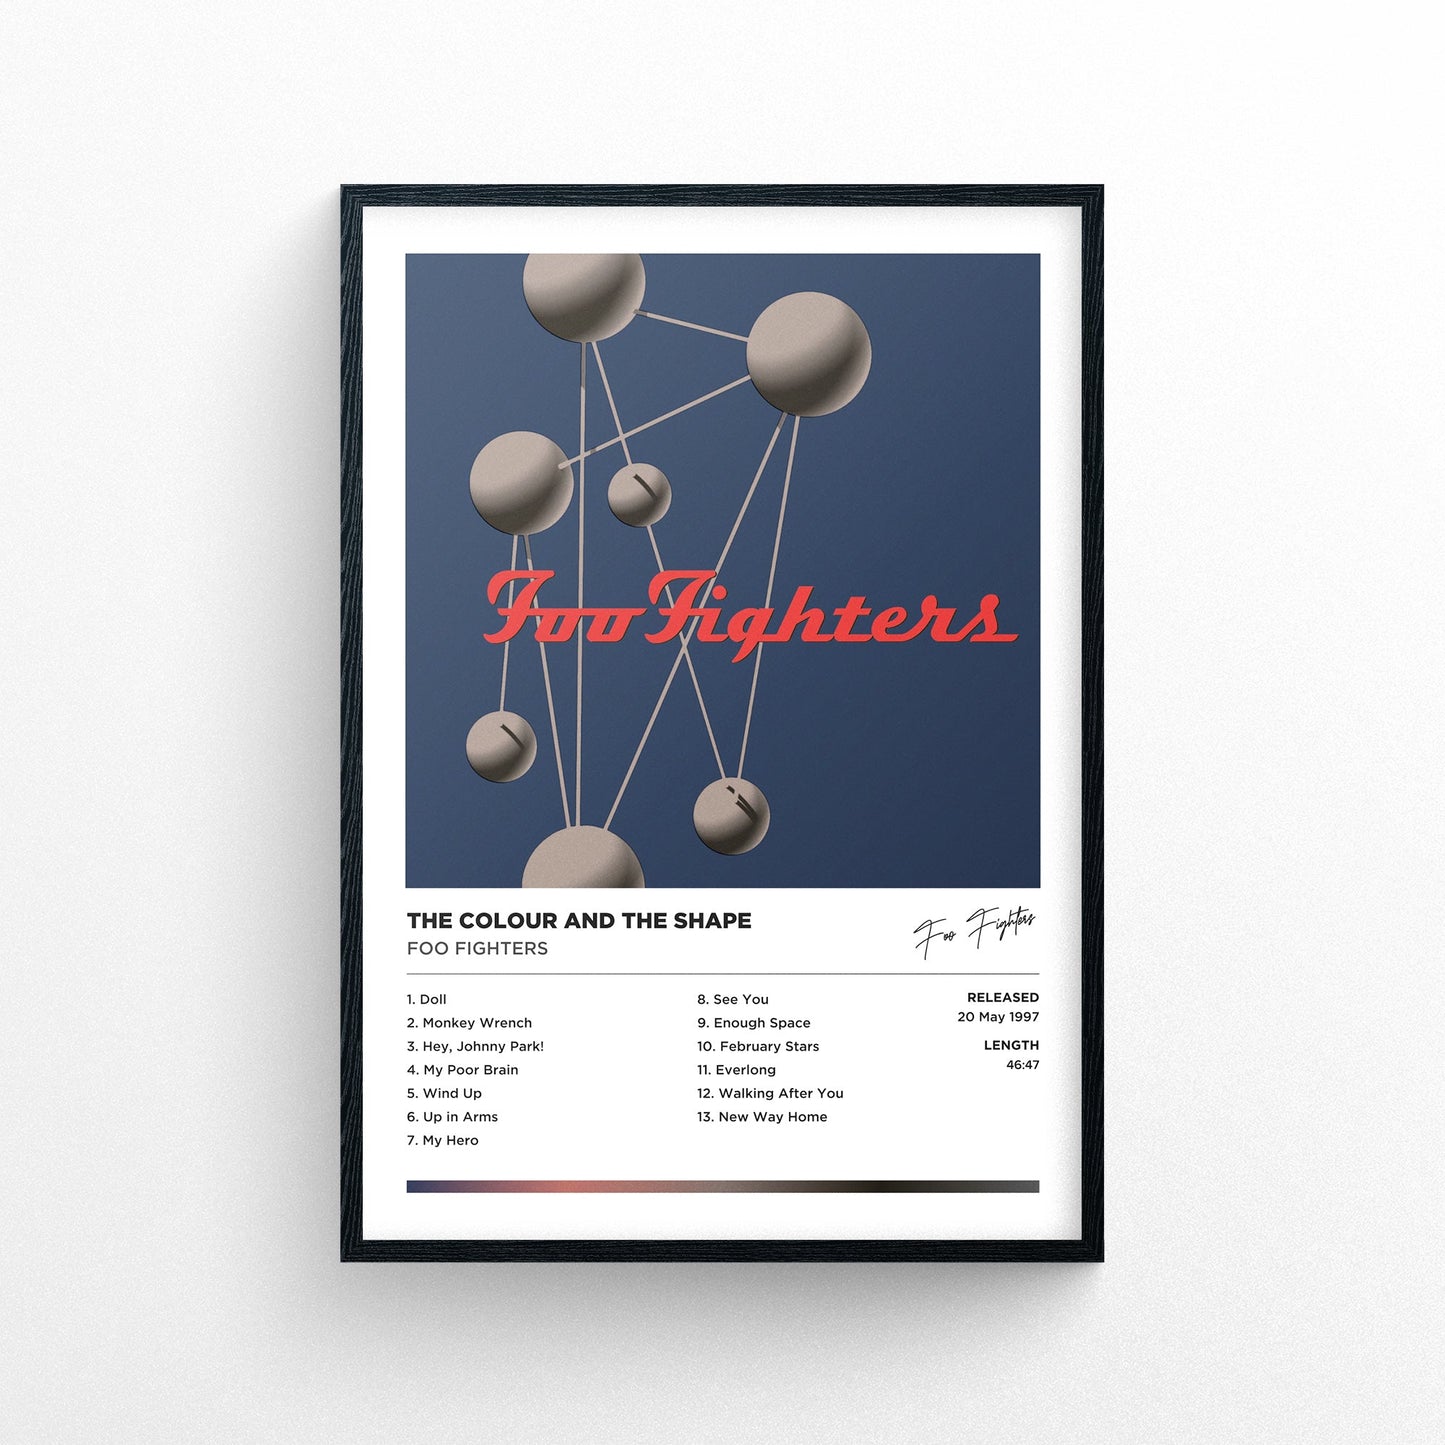 Foo Fighters - The Colour and the Shape Framed Poster Print | Polaroid Style | Album Cover Artwork